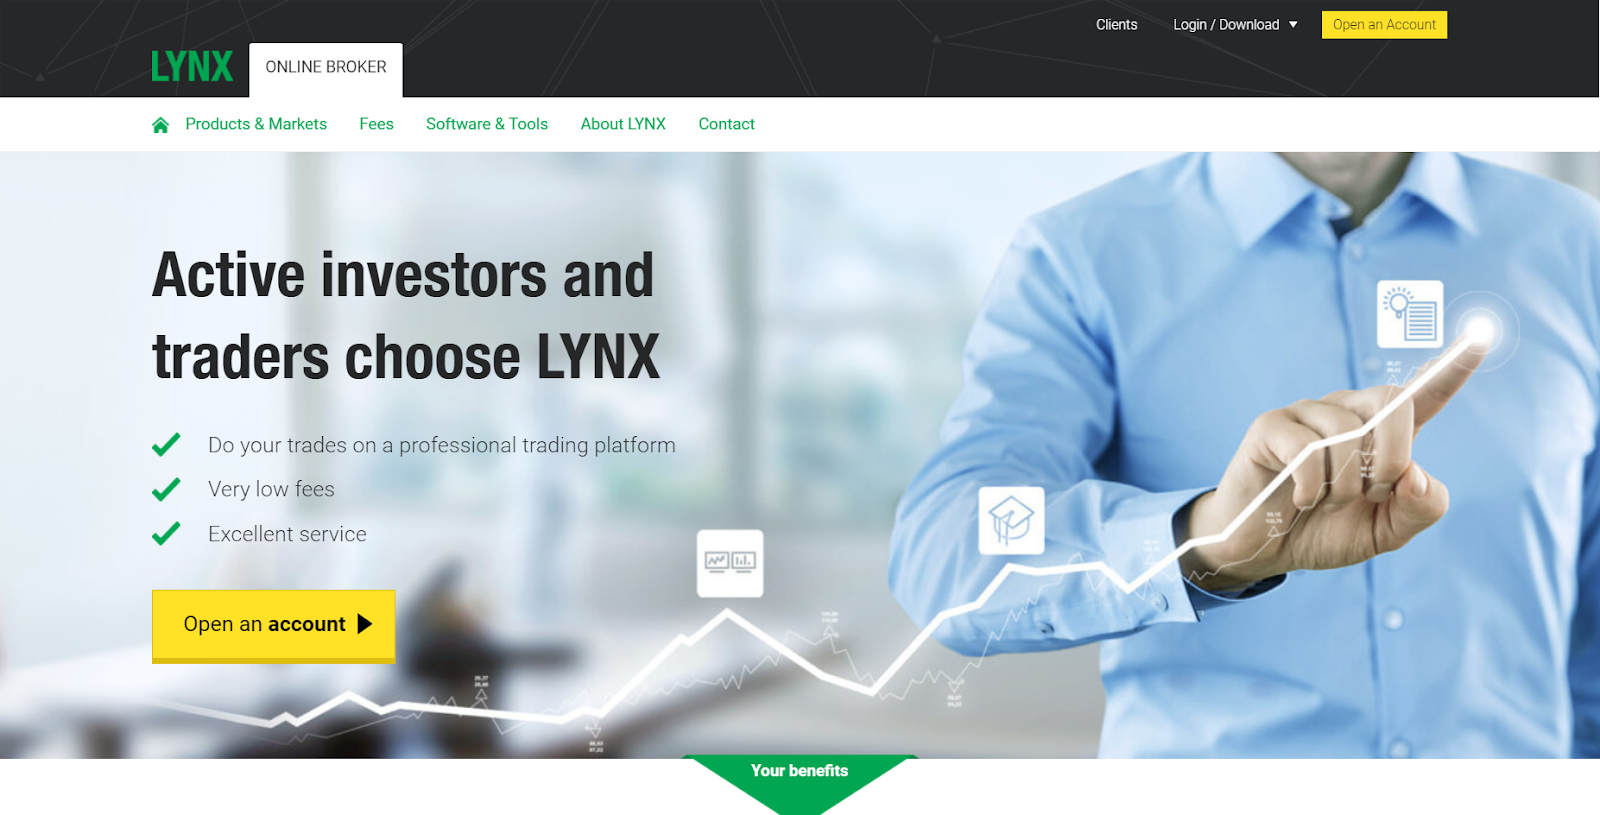 LYNX Review – Opening an account